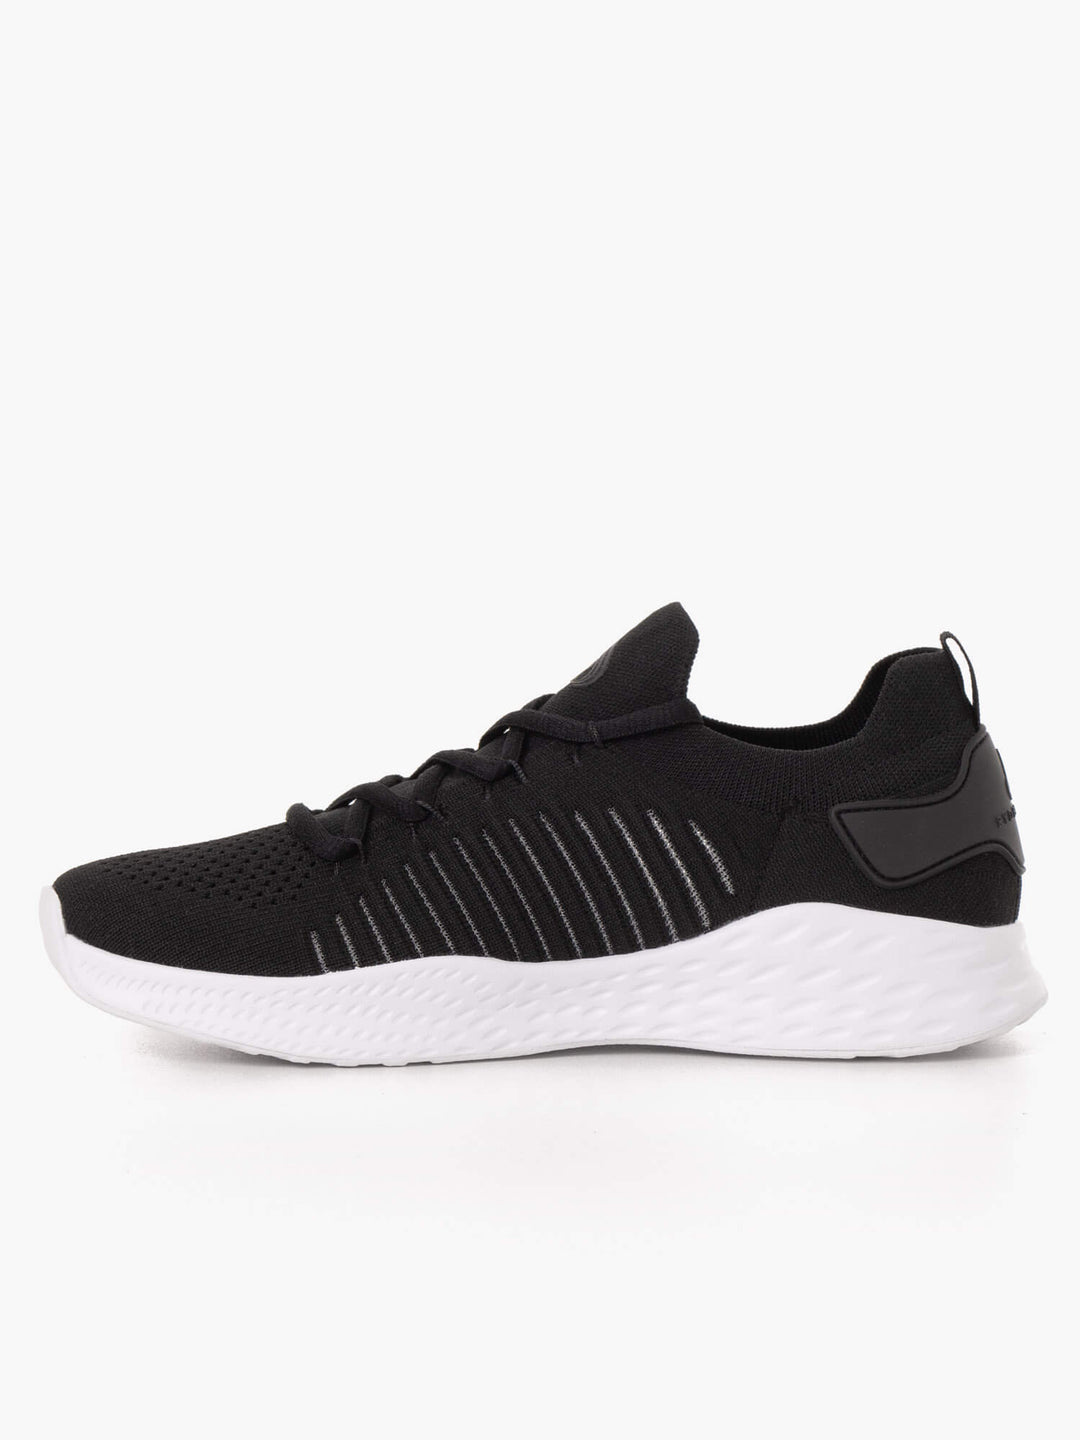 Womens Flylyte Trainer - Black Shoes Ryderwear 